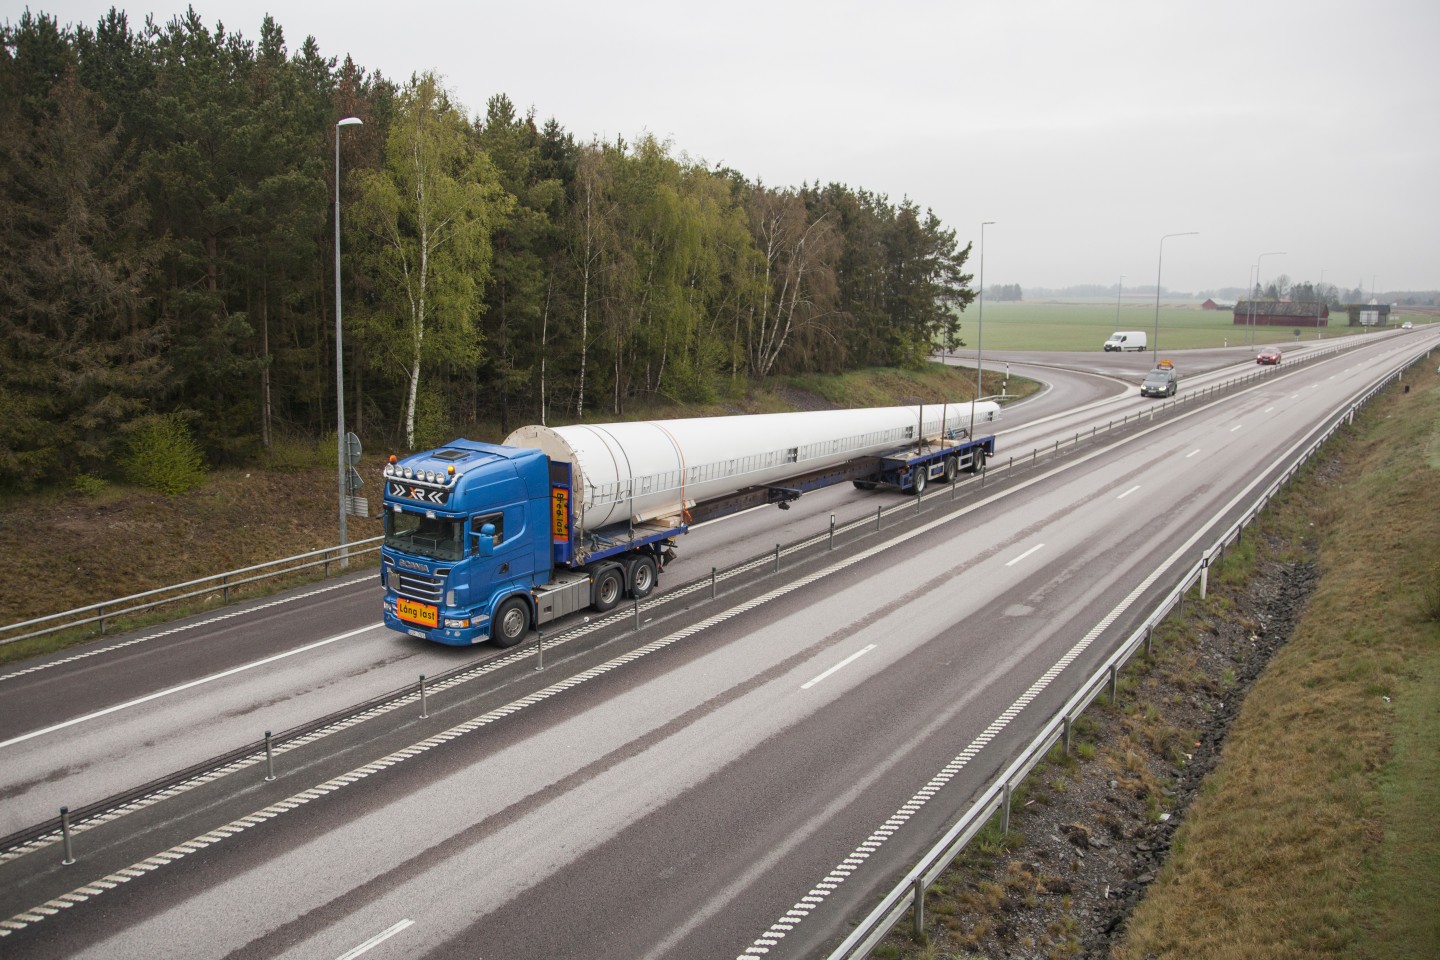 Modvion's modular wind tower is transported through Sweden